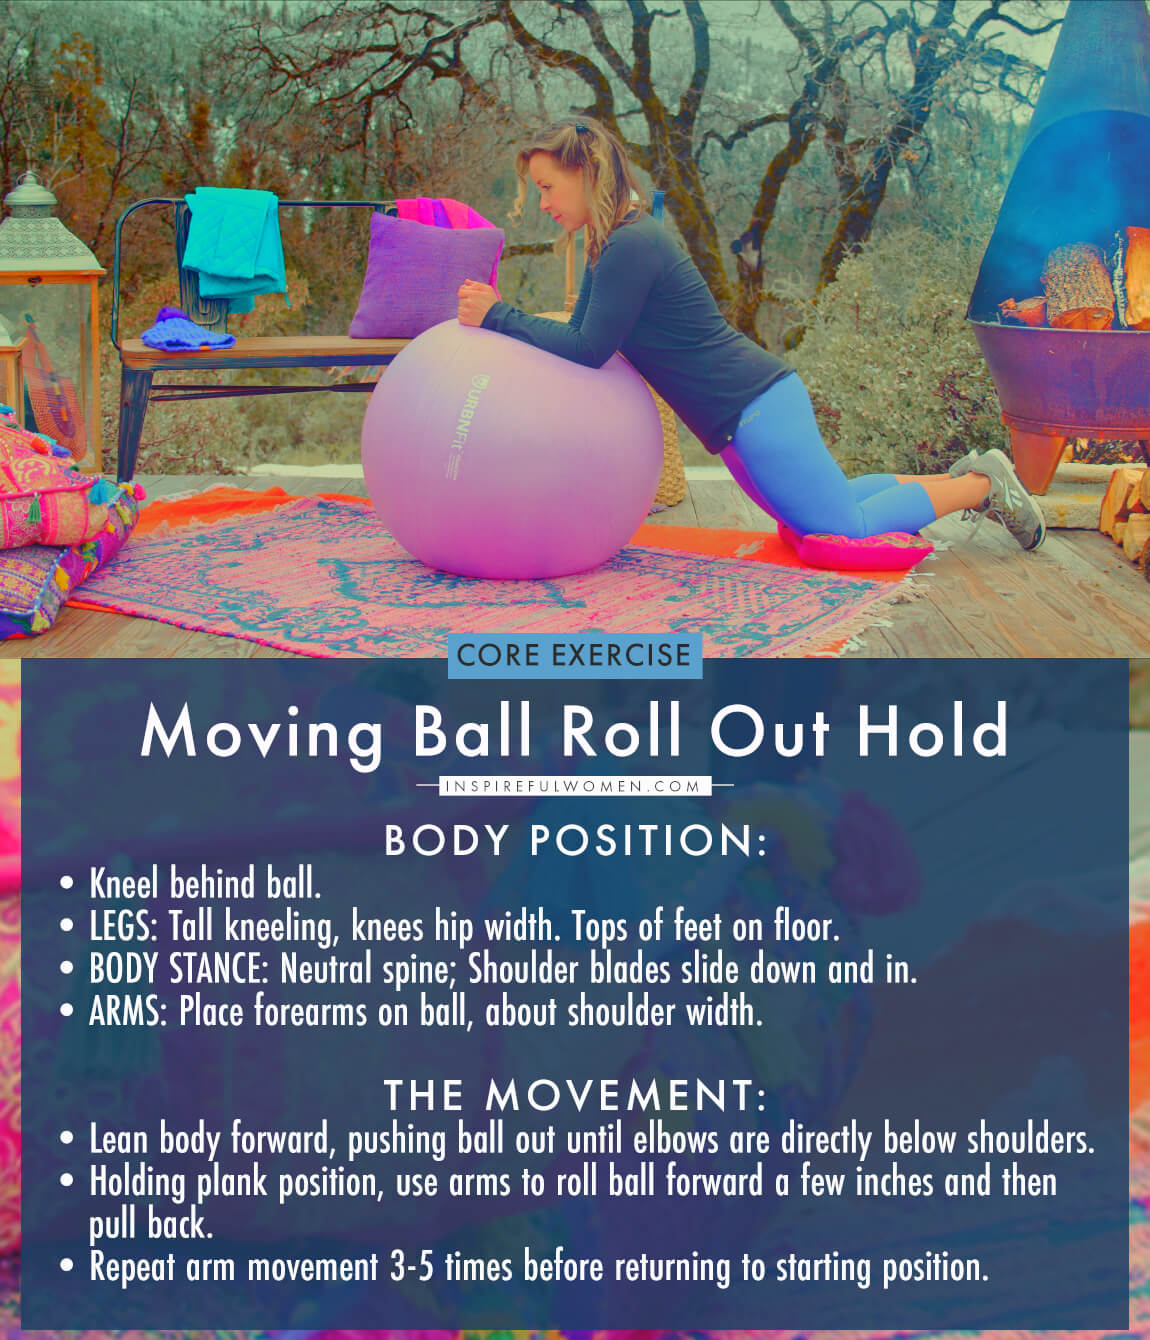 how-to-do-stability-ball-knee-plank-buzz-saw-rollout-hold-easy-core-ab-exercise-proper-form